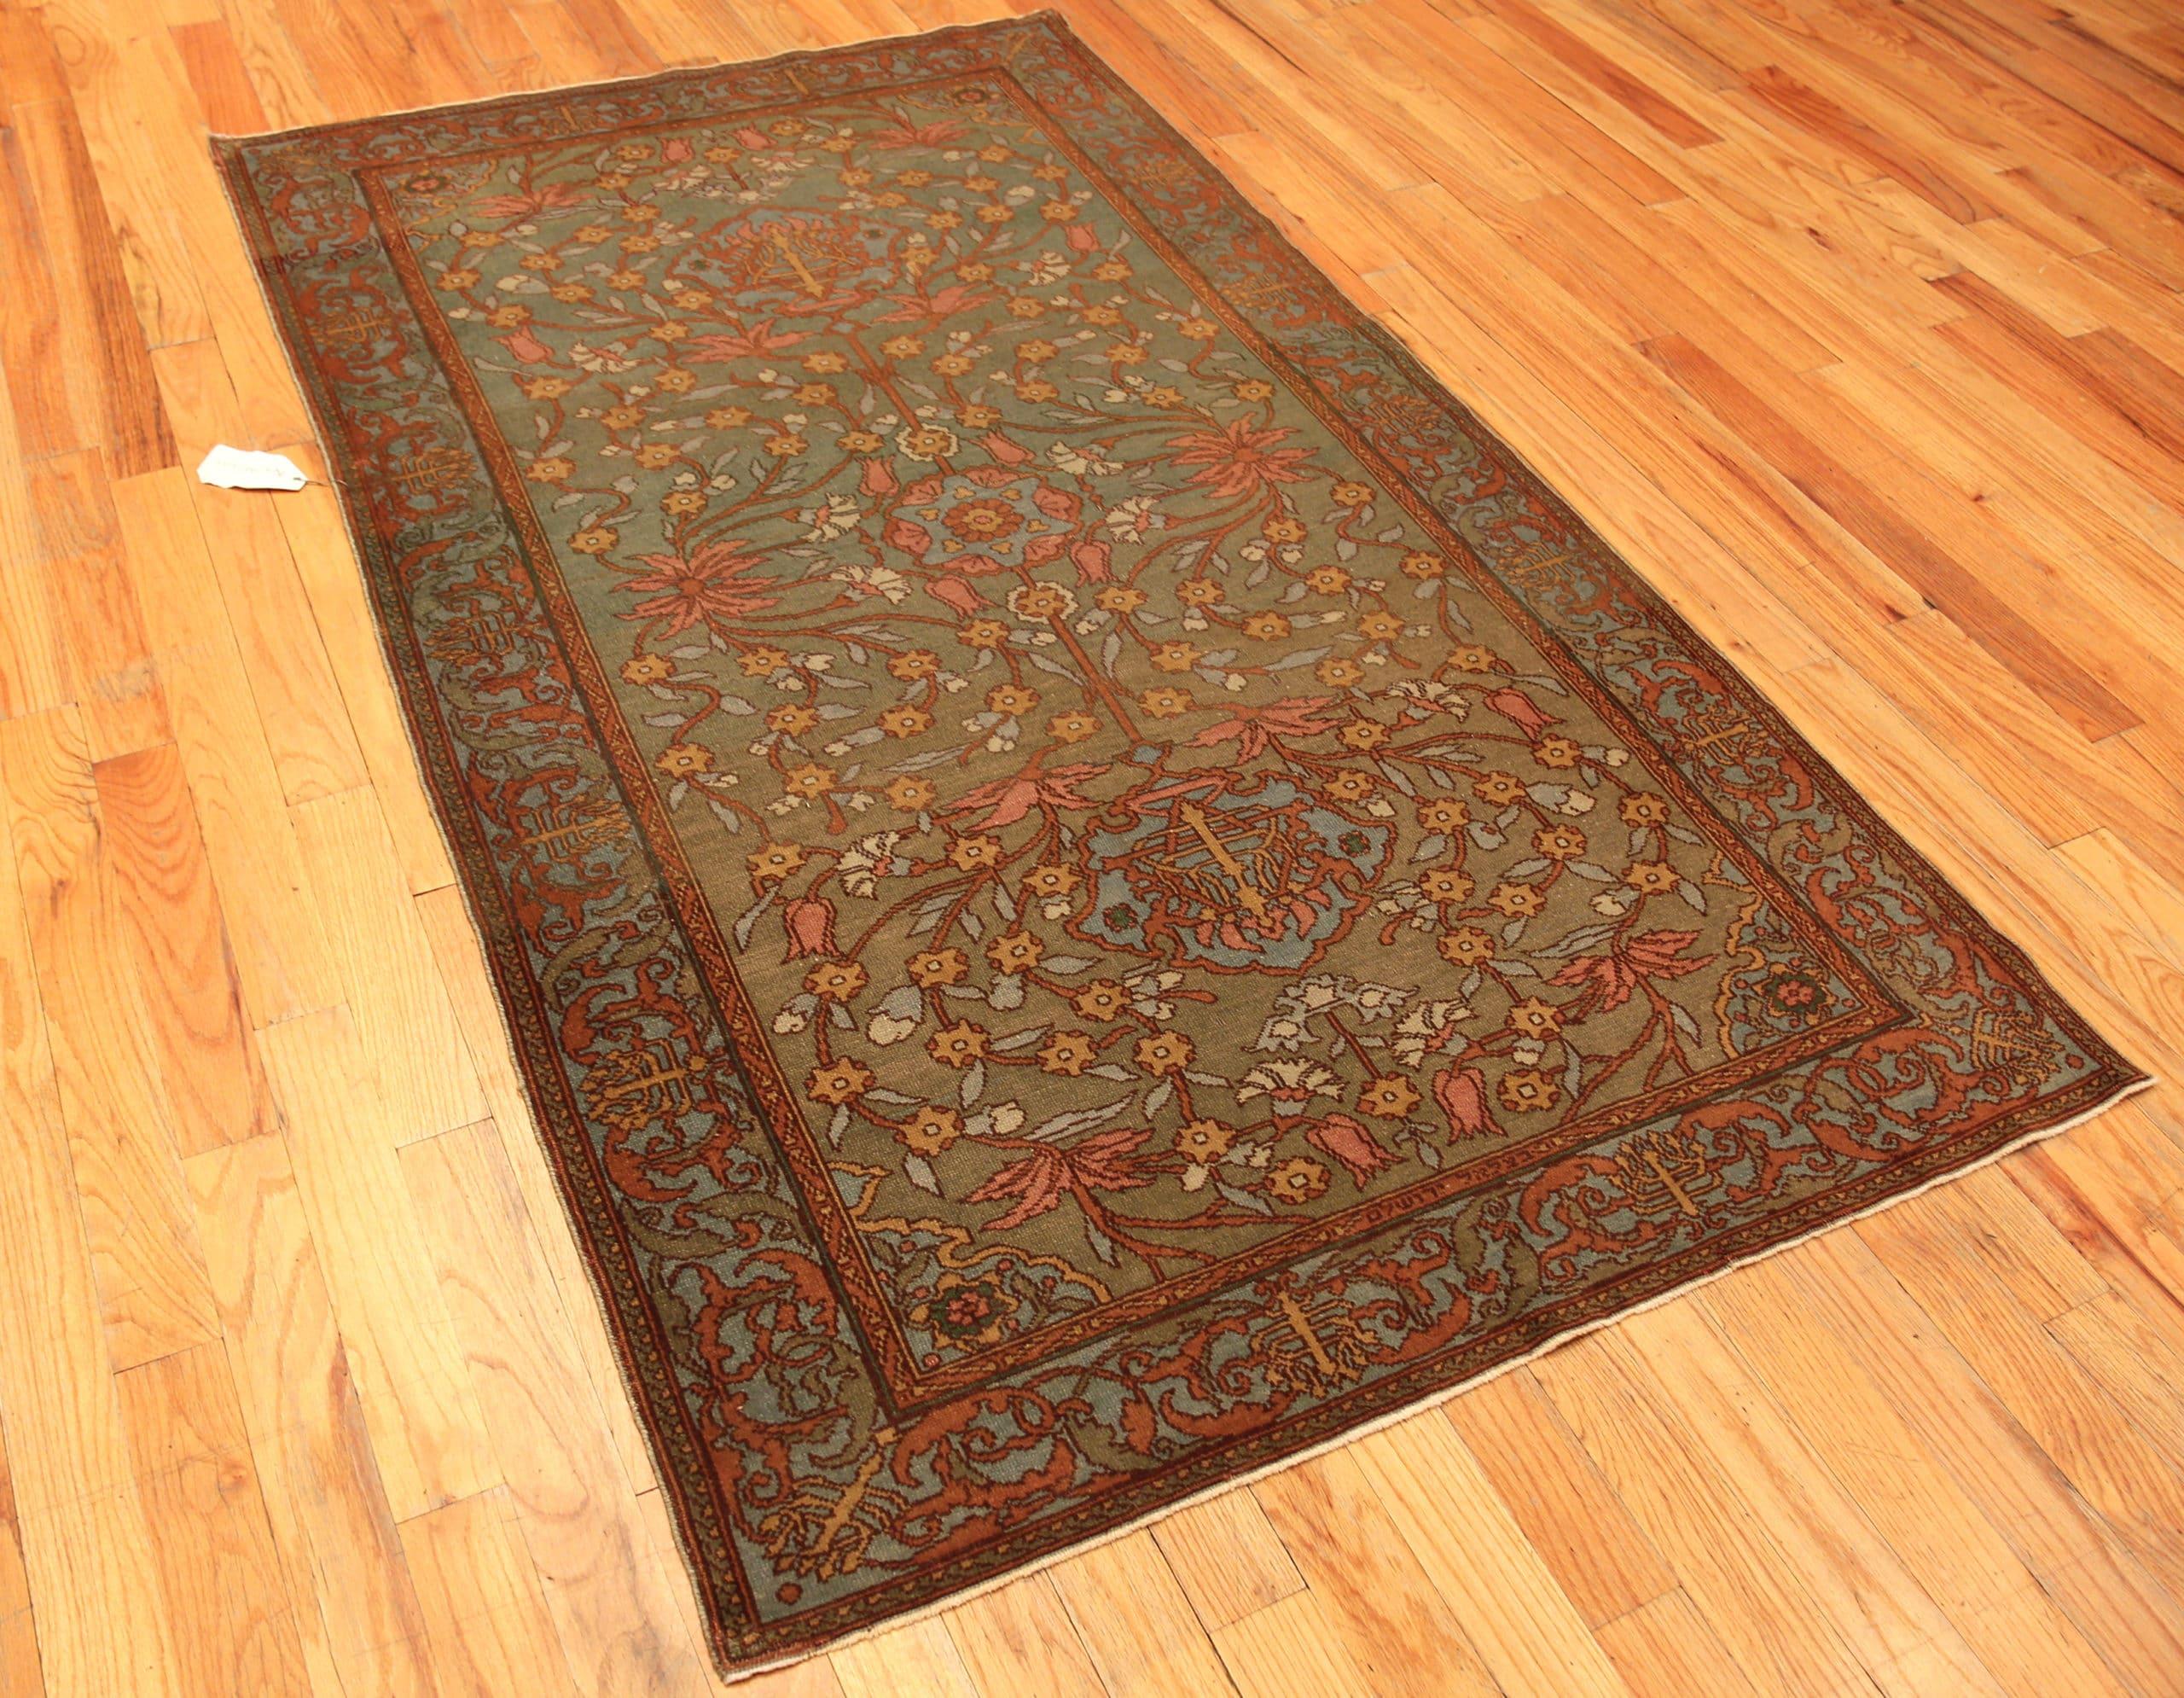 Antique Bezalel rug, origin: Jerusalem Israel, circa early 20th century. Size: 4 ft 9 in x 7 ft 9 in (1.45 m x 2.36 m)

Initially this lovely antique Bezalel impresses the viewer as a design of oriental derivation and to some extent its details are